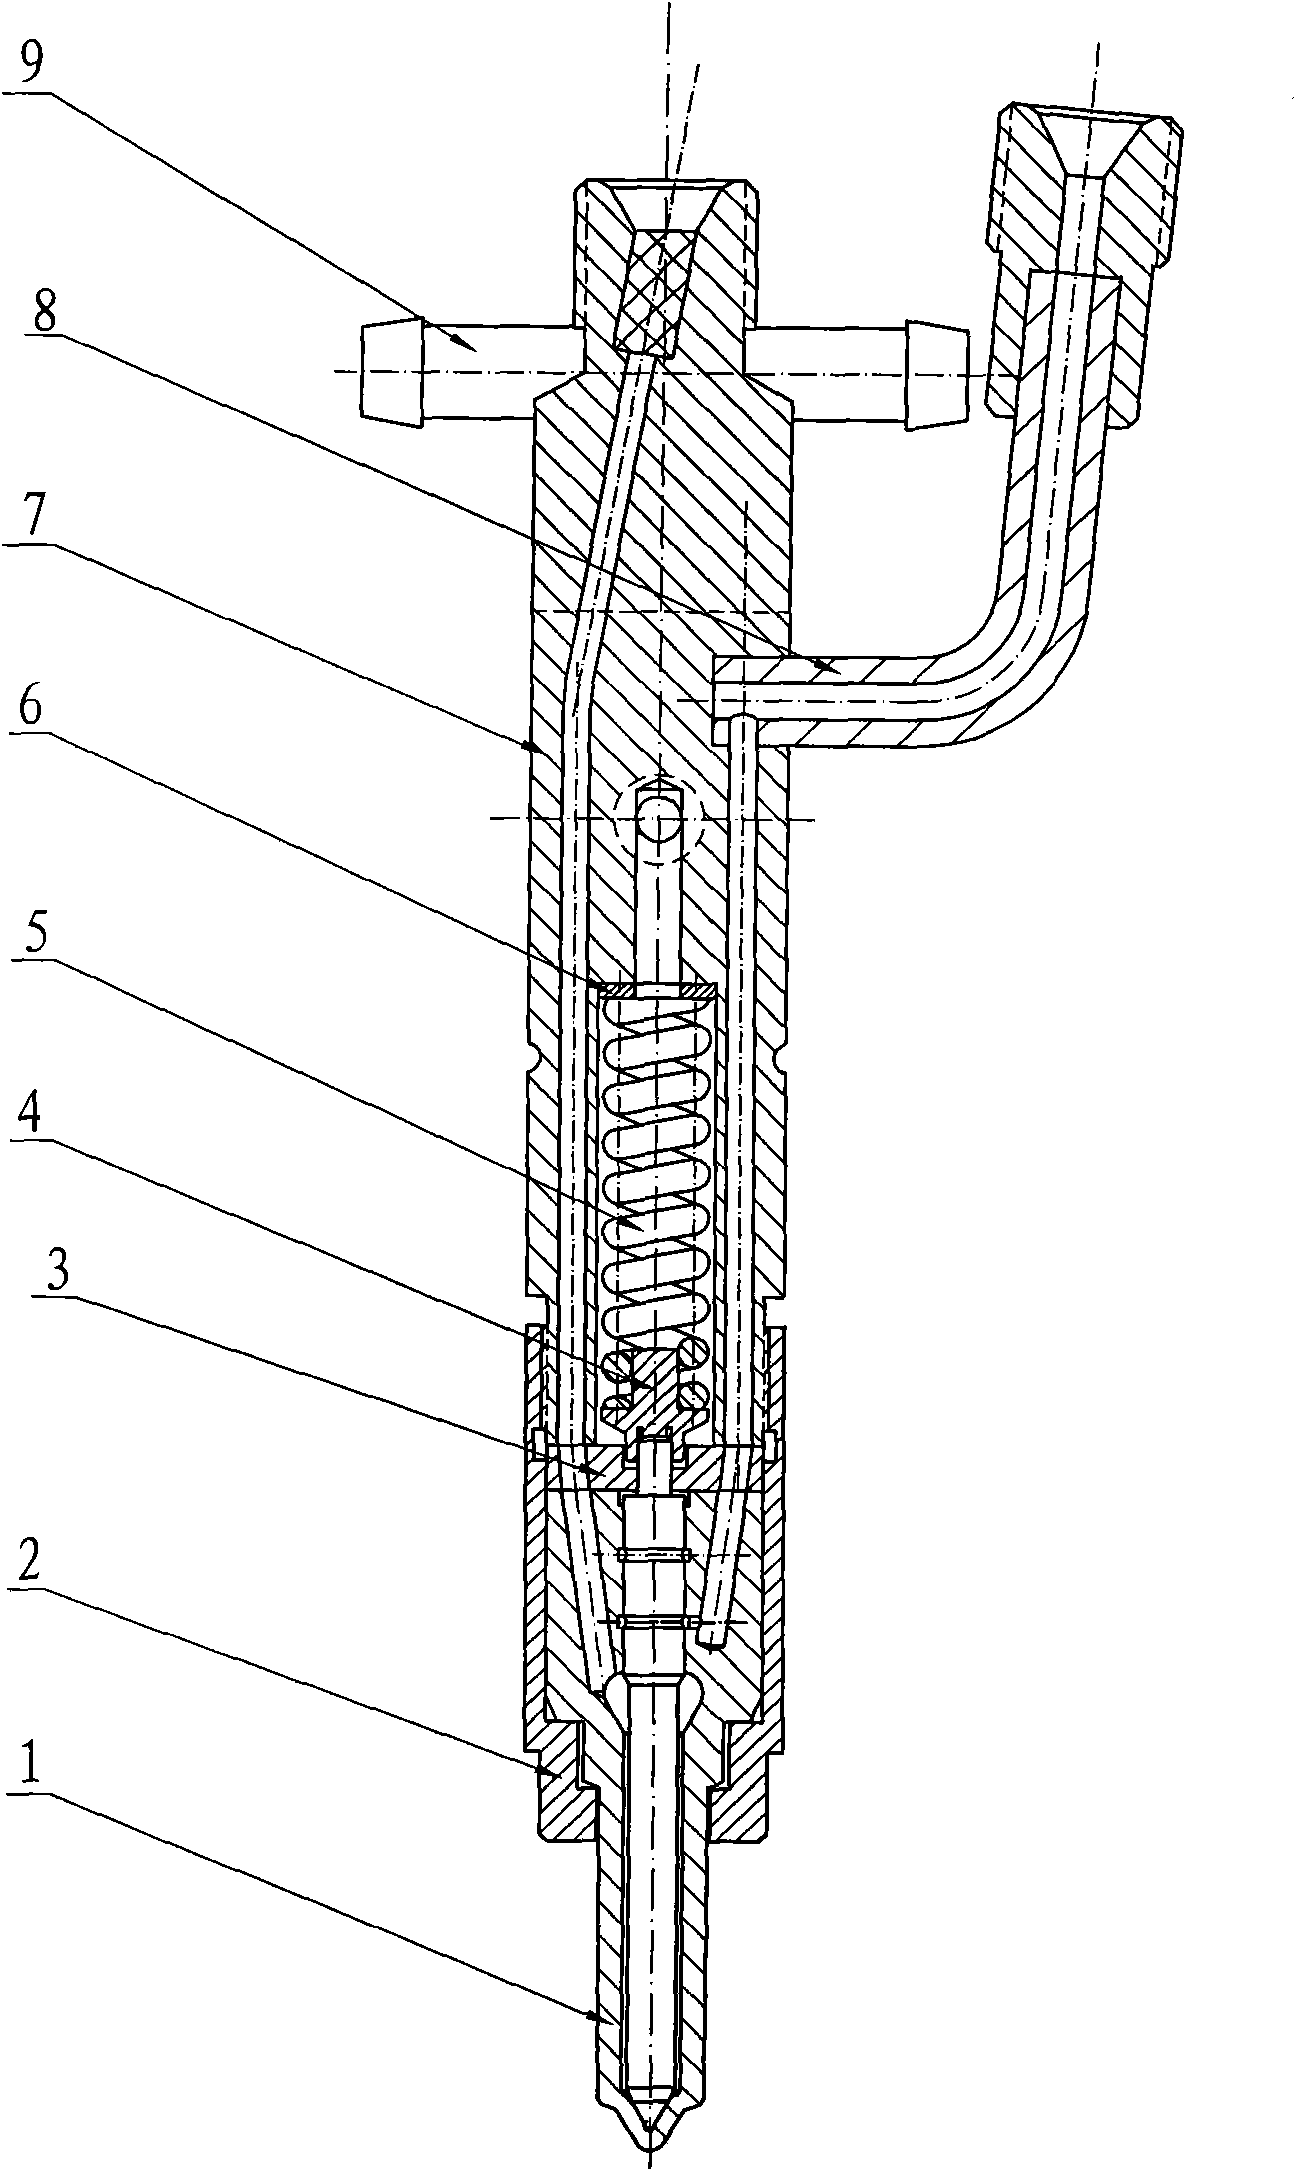 Diesel injector suitable for various fuels